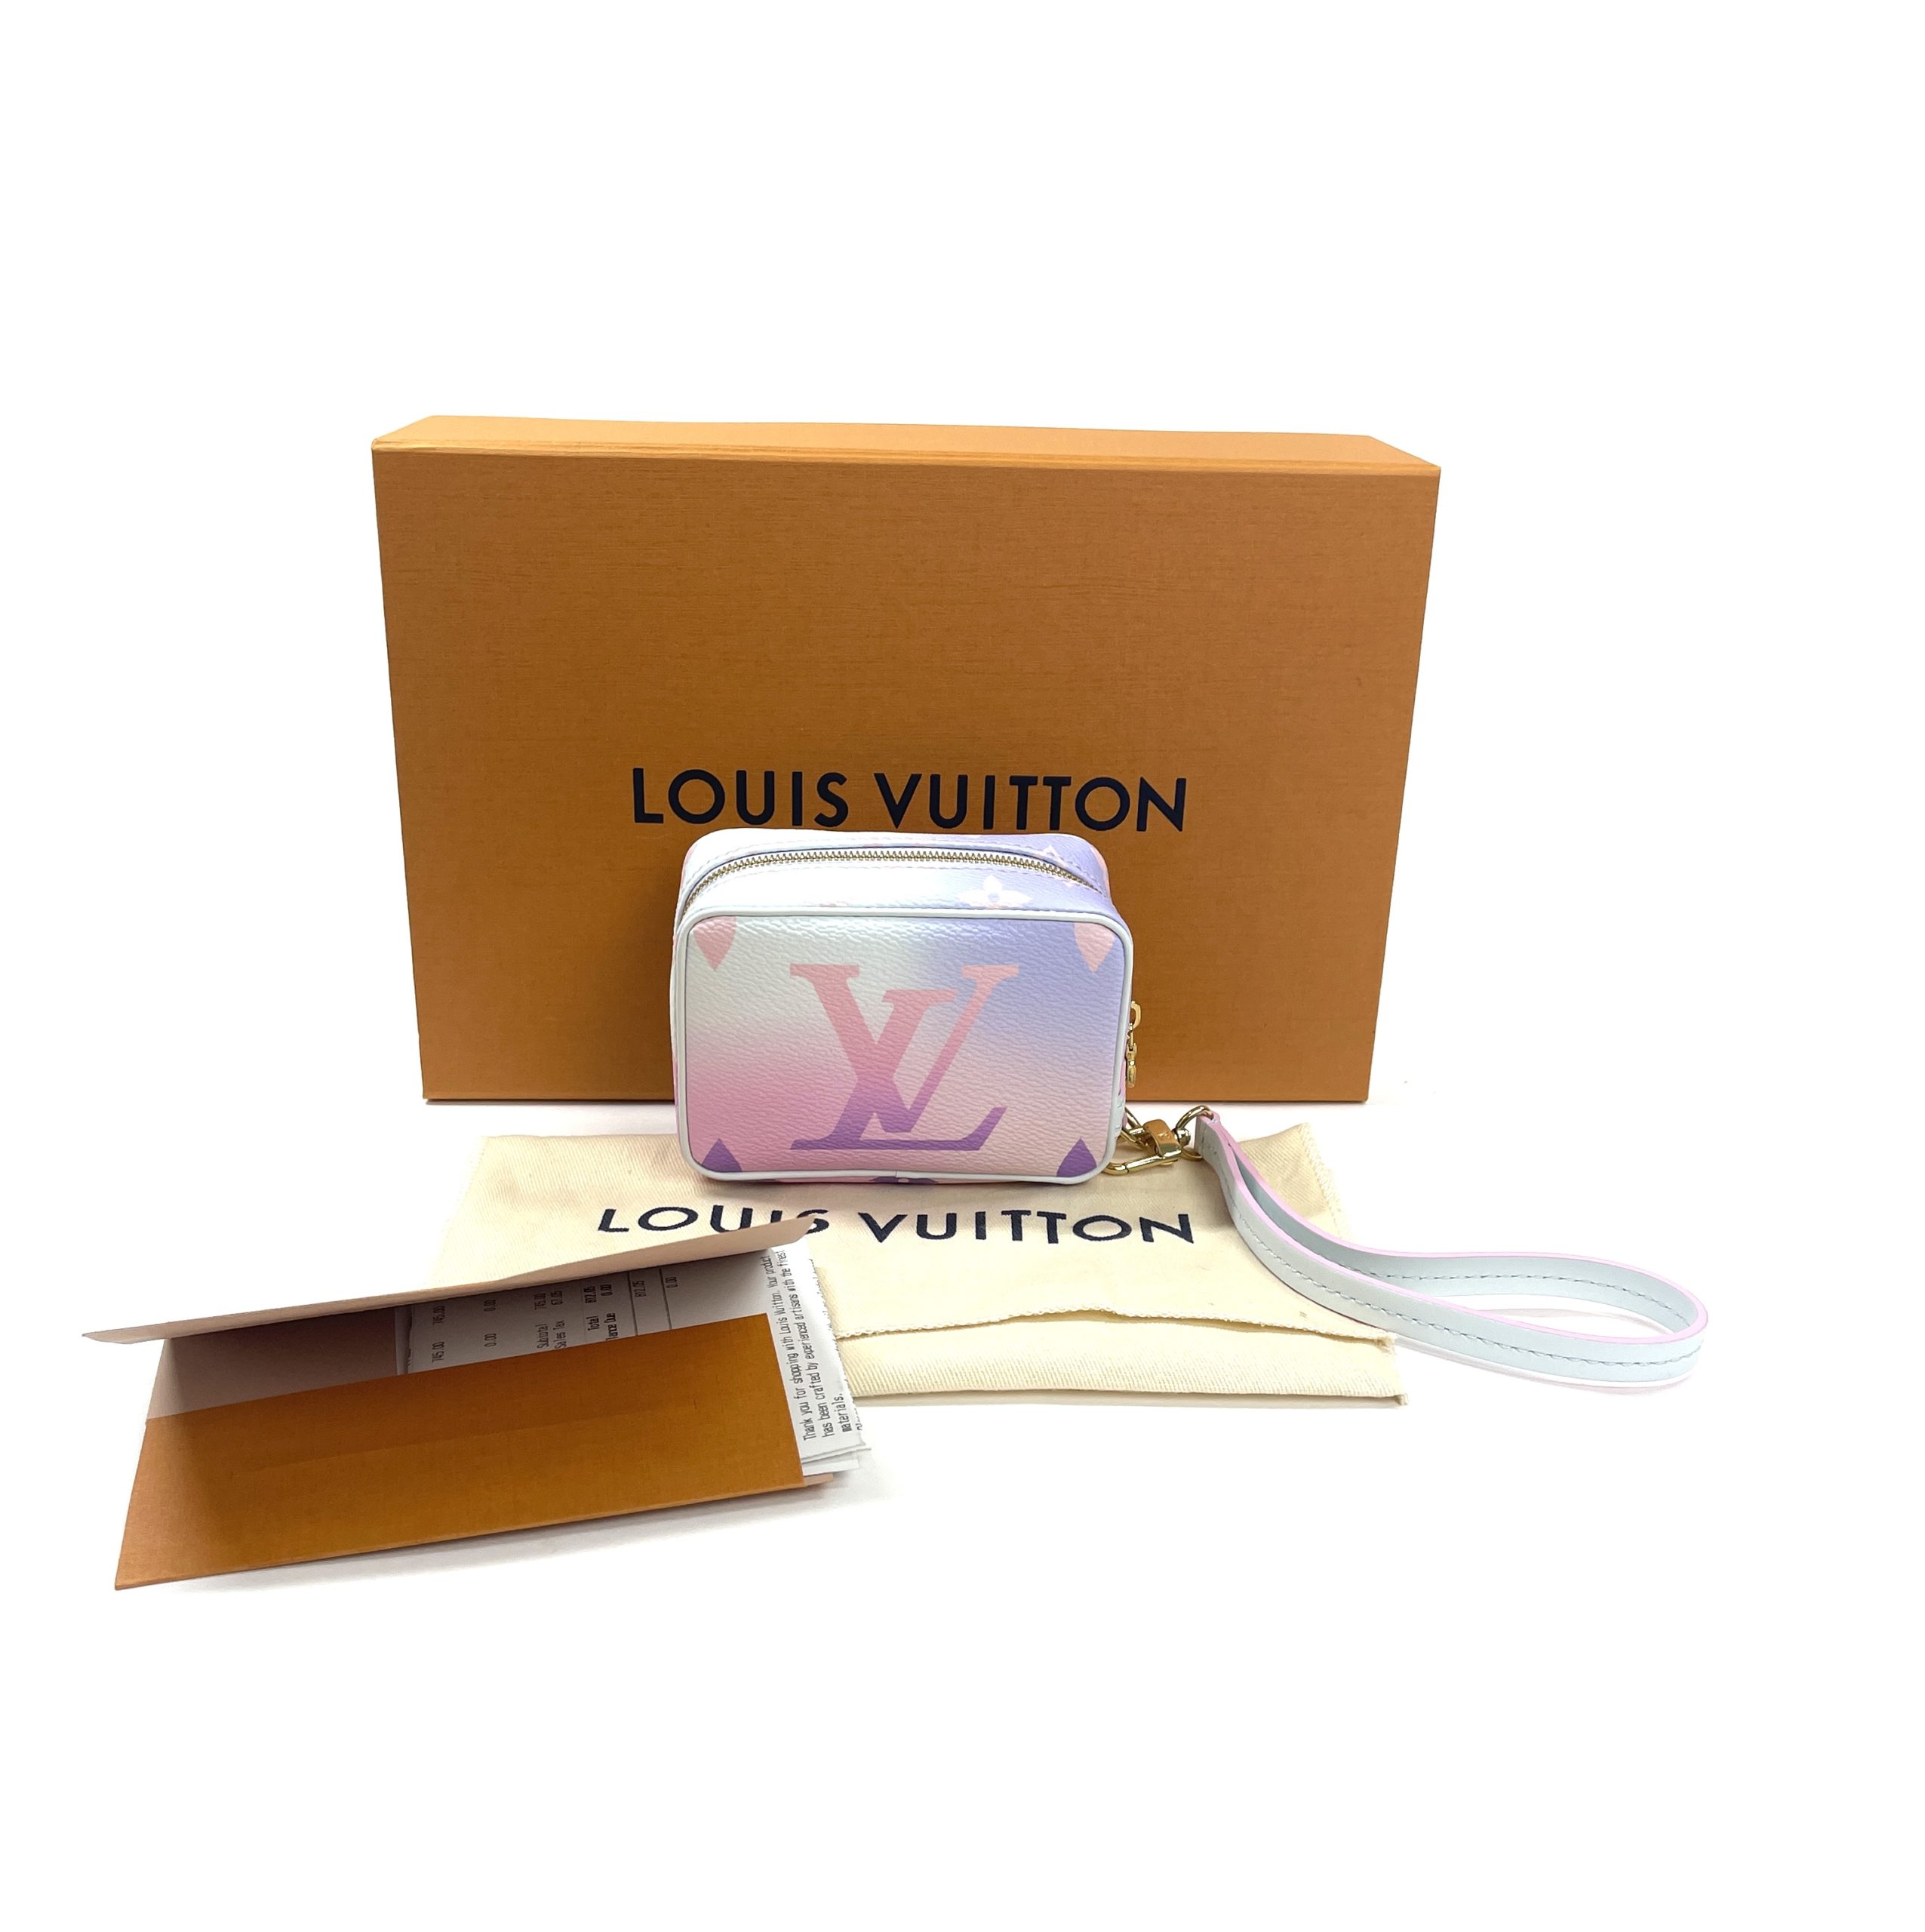 Louis Vuitton Monogram Giant Spring In The City Wapity Case - Pink